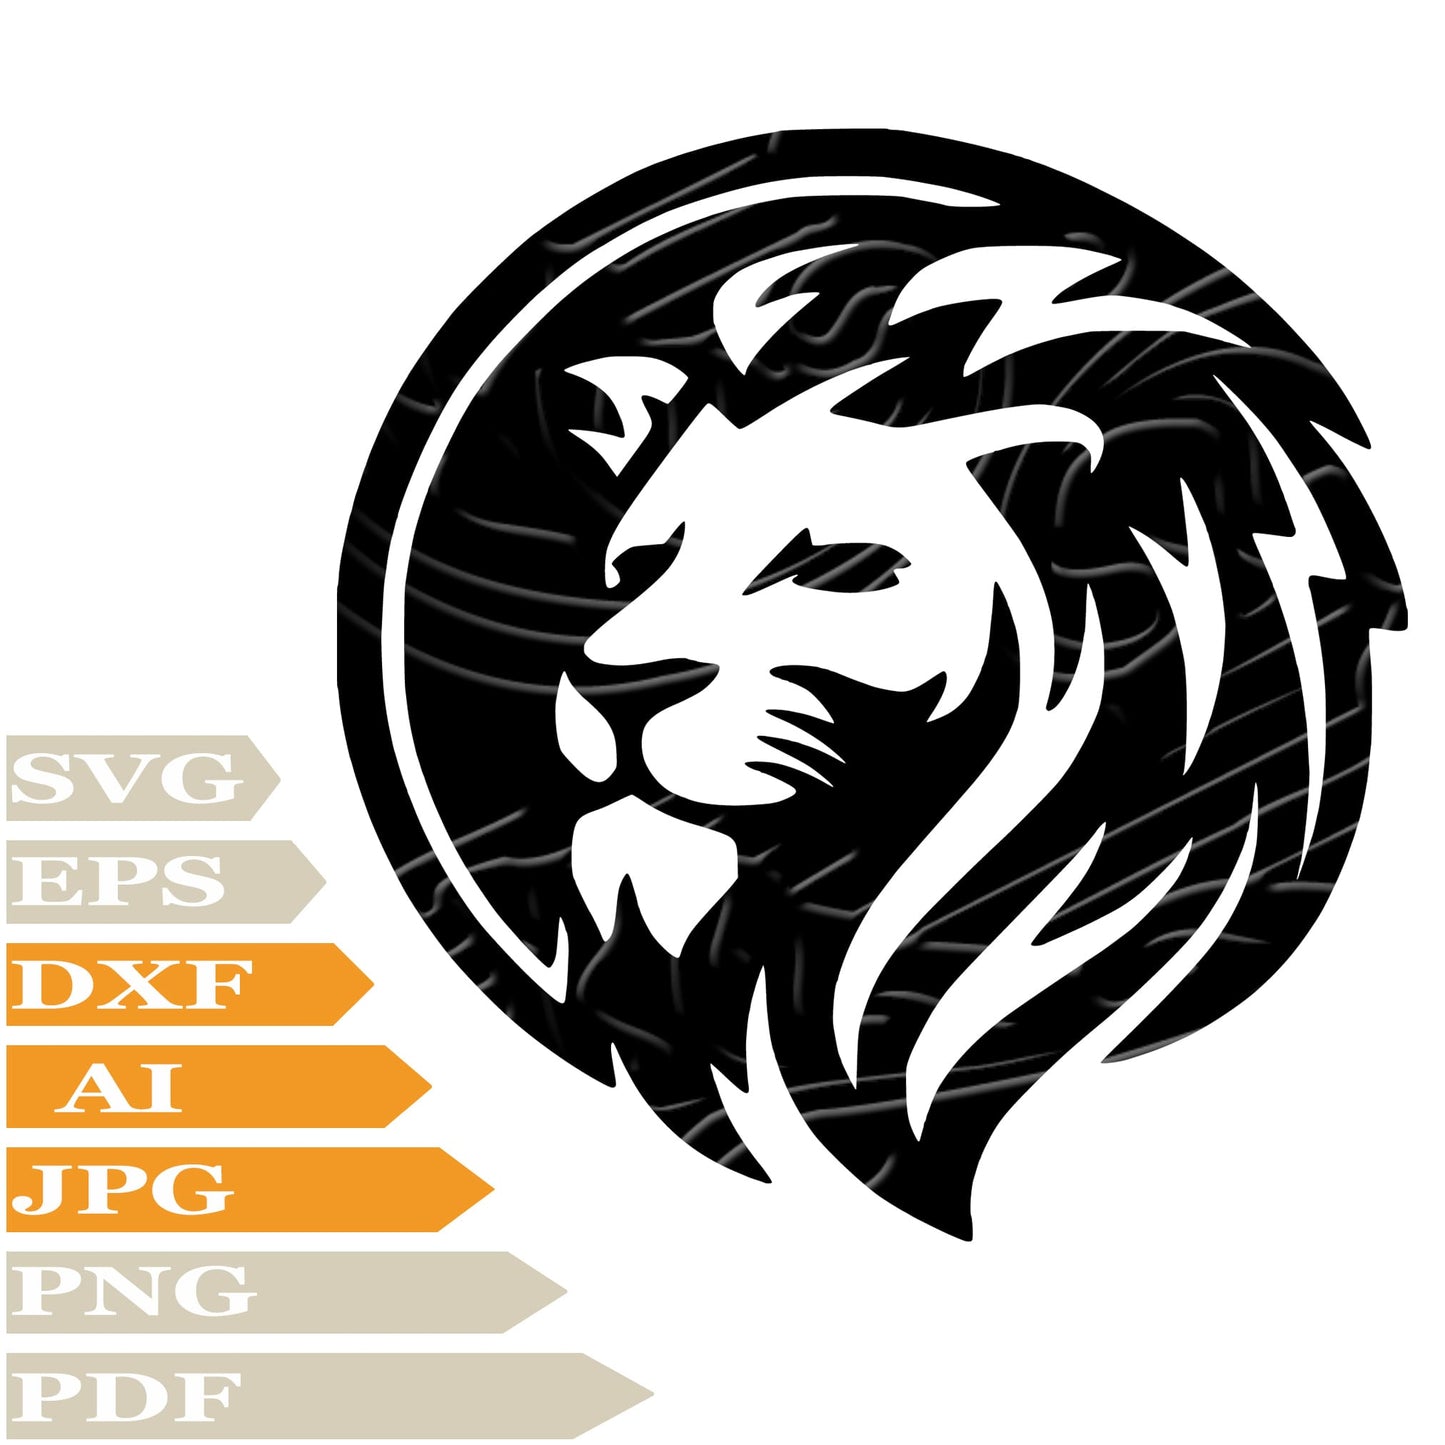 Lion SVG-Wild Lion Personalized SVG-Lion Head Drawing SVG-Lion Wild Animals Vector Illustration-PNG-Decal-Cricut-Digital Files-Clip Art-Cut File-For Shirts-Silhouette